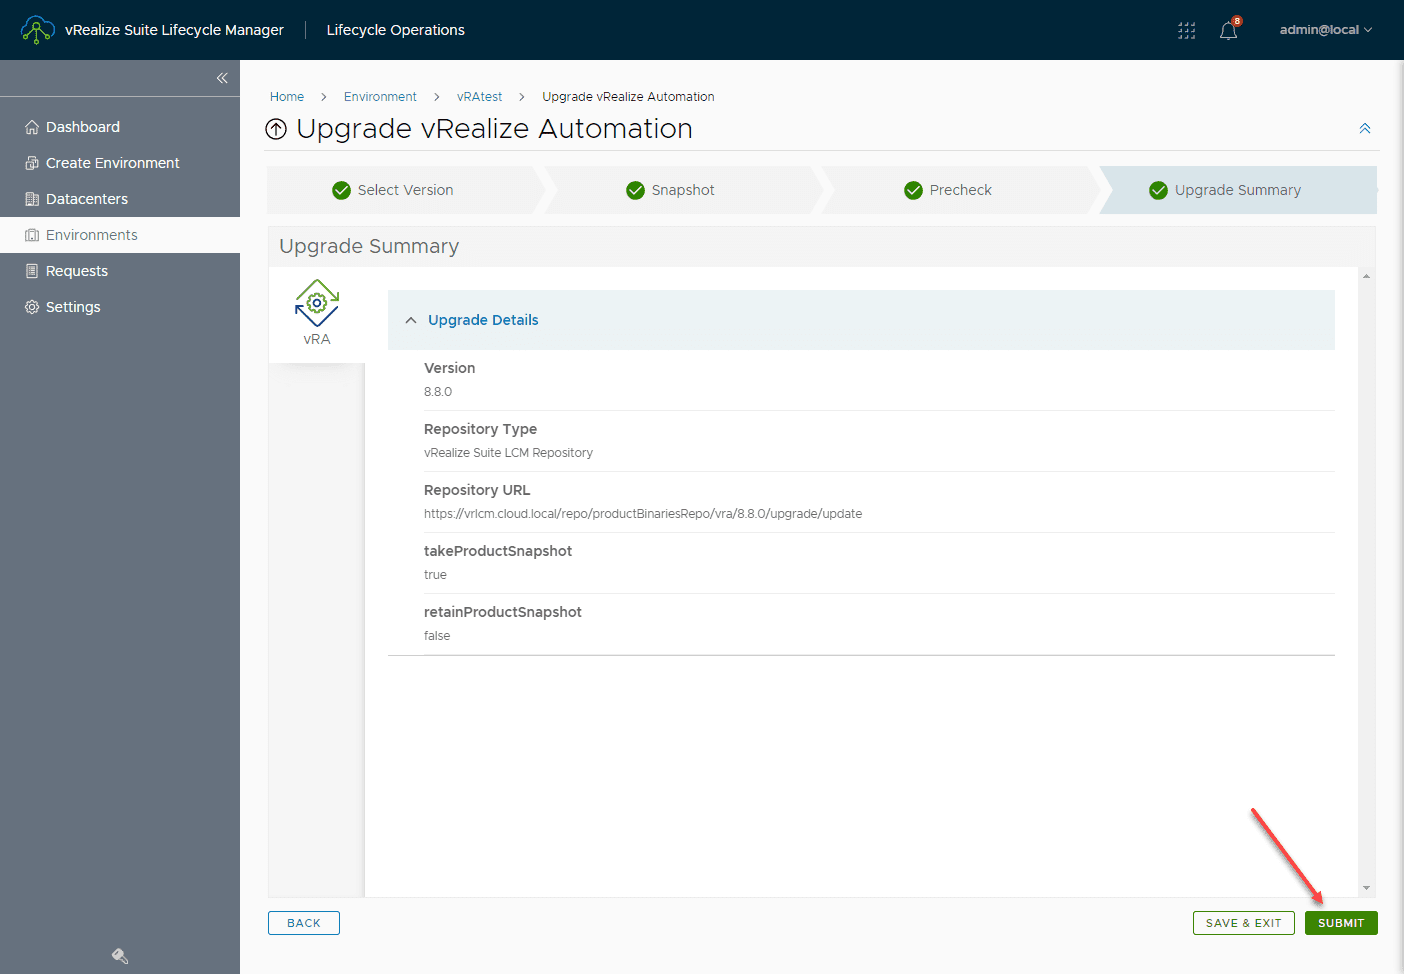 Submit the upgrade upgrade request for upgrading vRealize Automation to v8.8